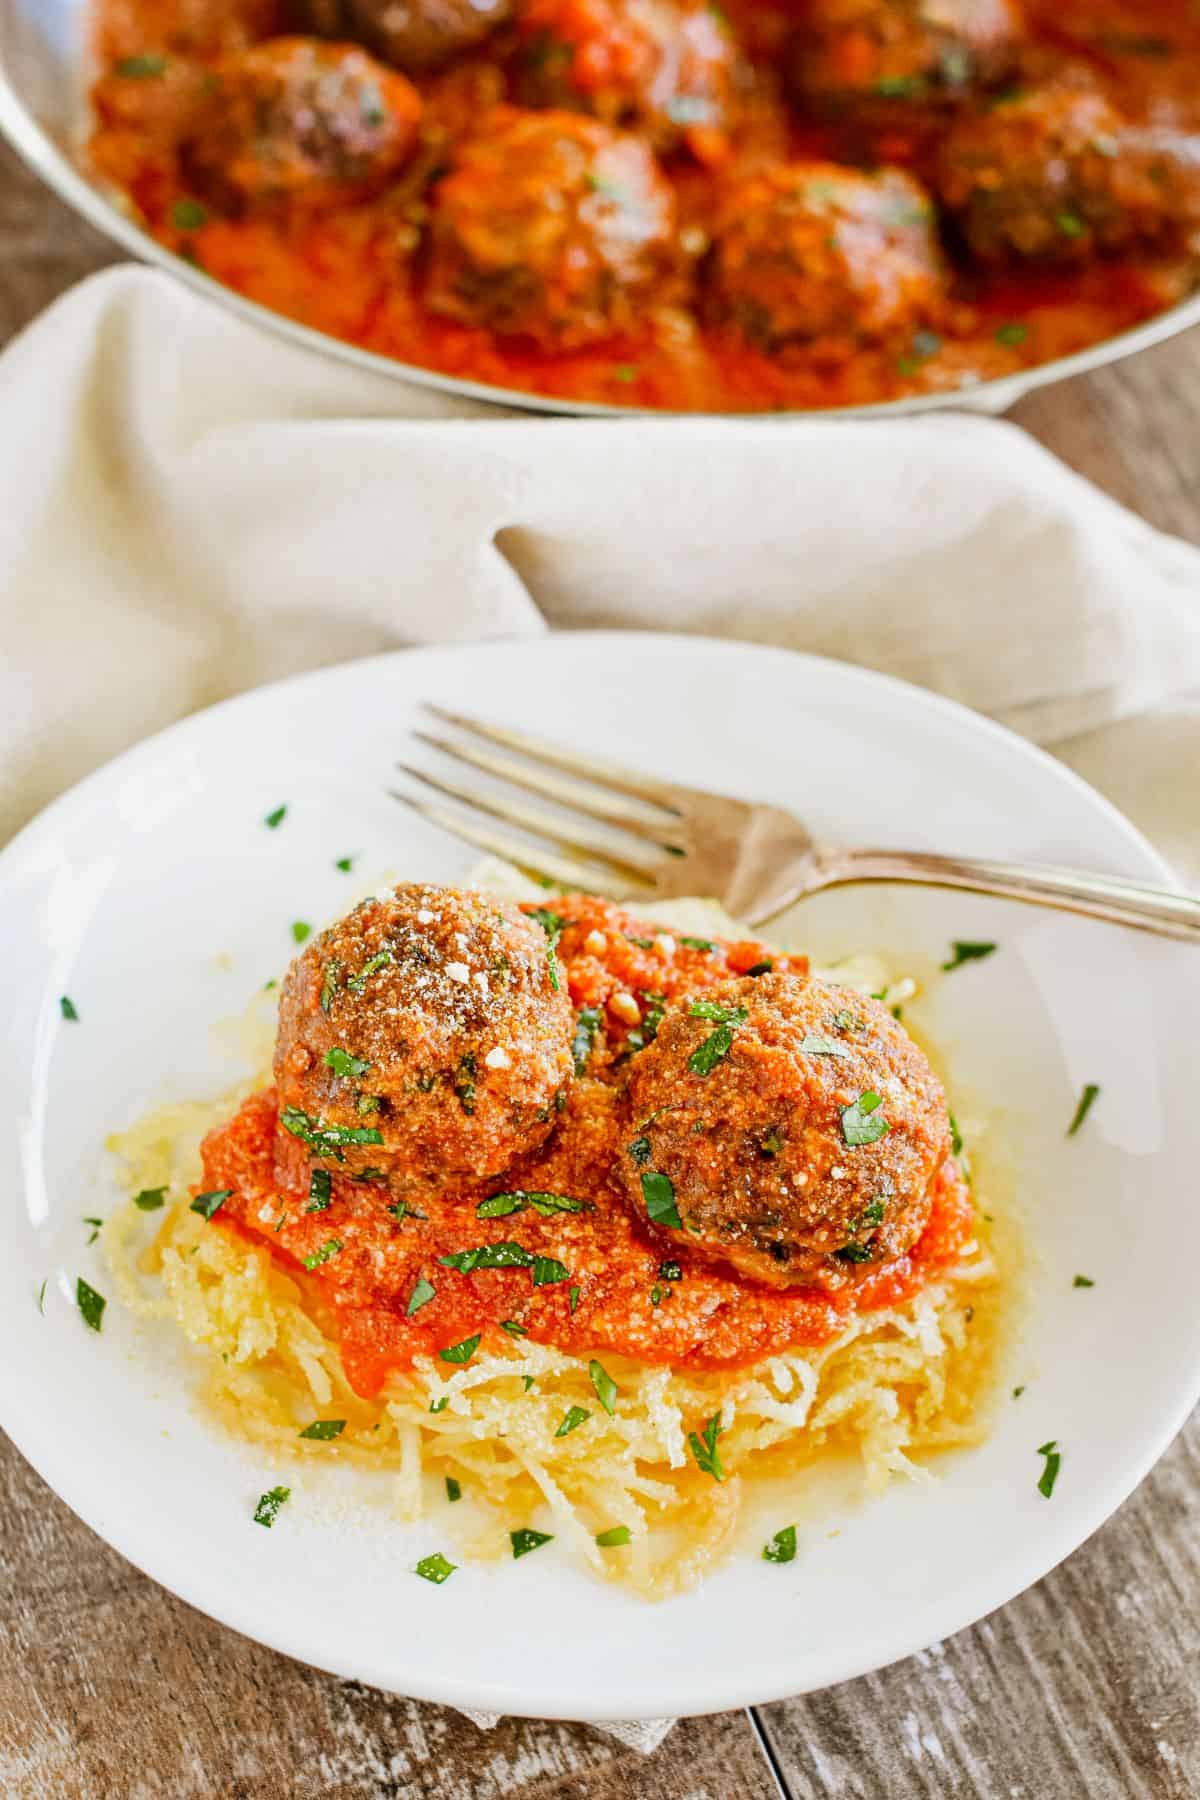 Impossible Burger Meatballs on top of spaghetti.